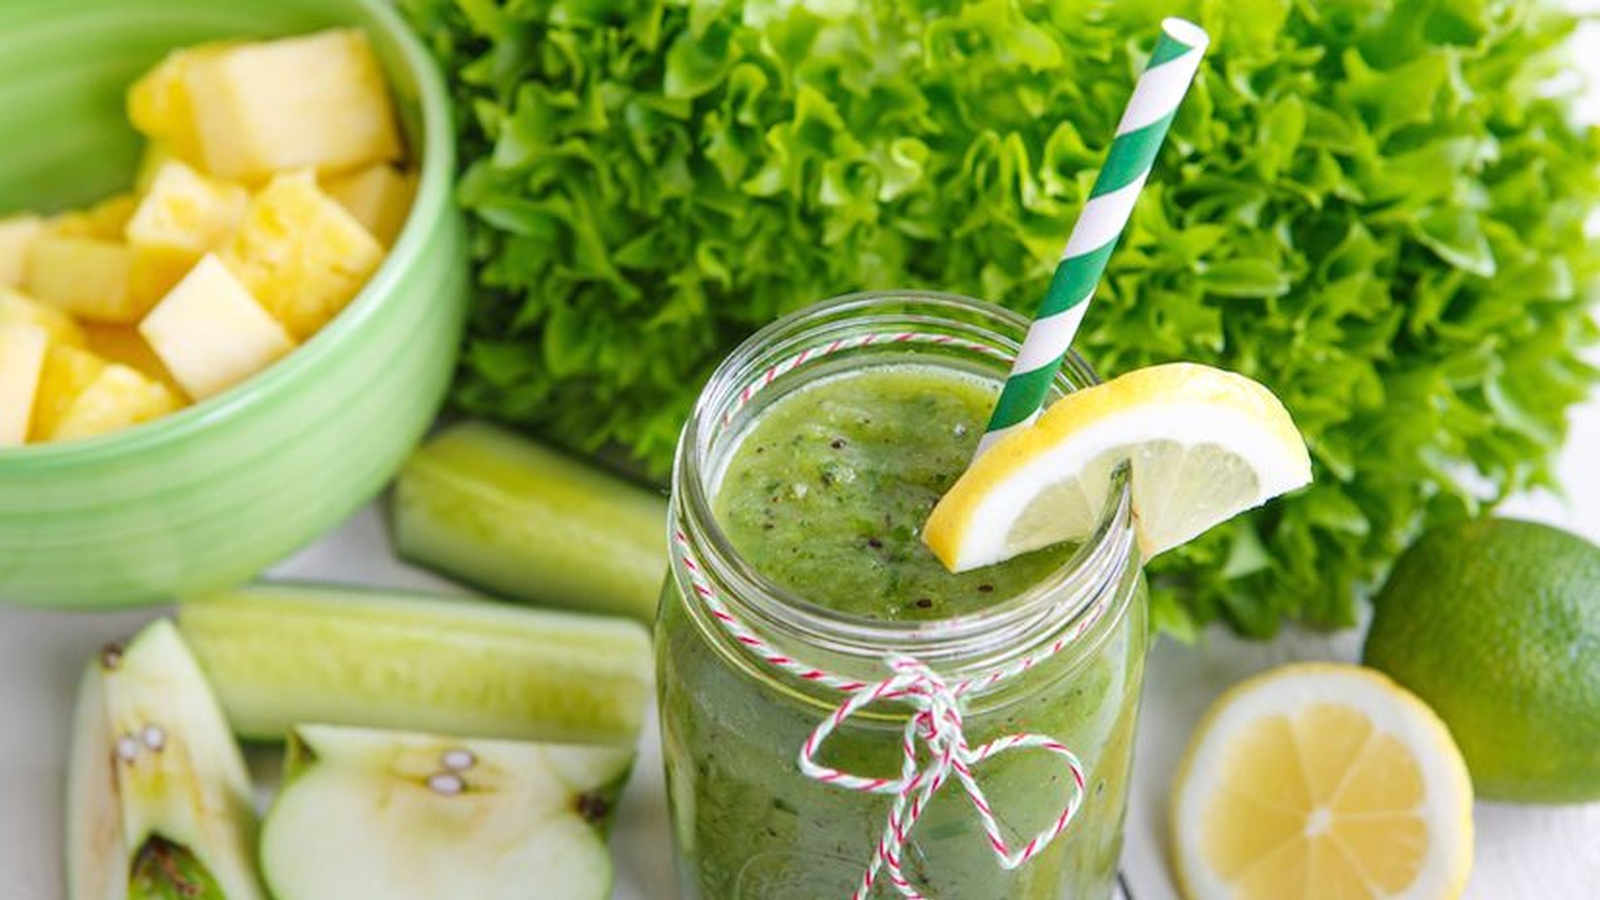 Can Green Smoothies Transform Your Life?